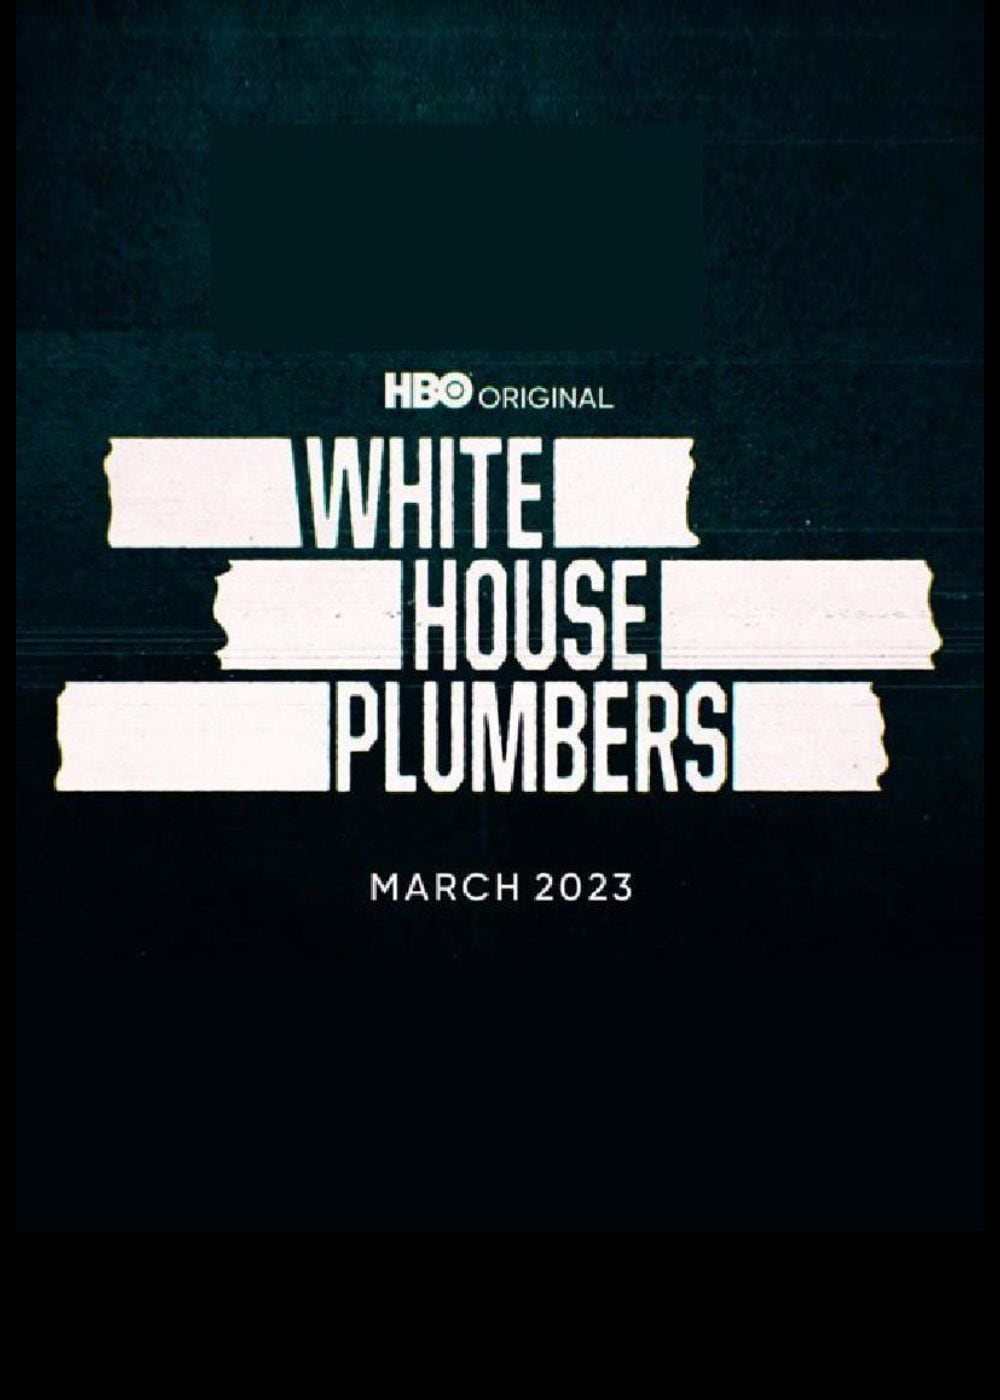 White House Plumbers 778901421 Large 1 1679838154 